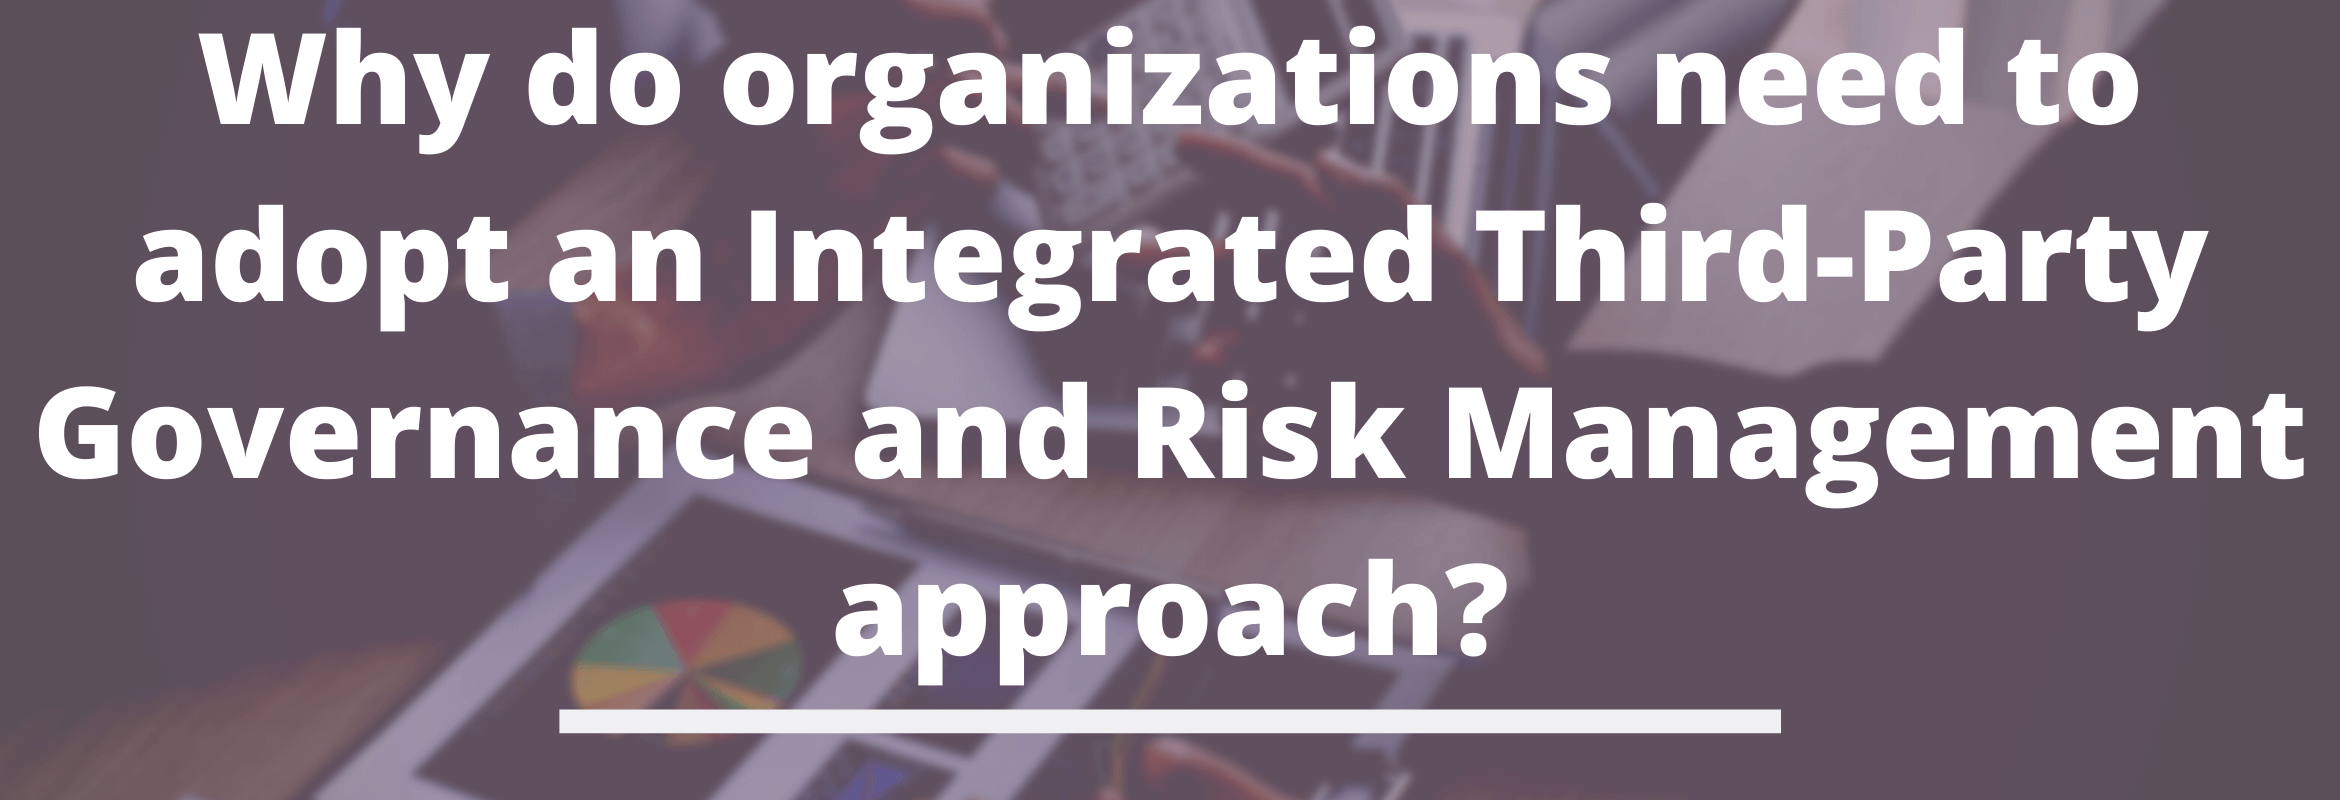 Image of Third-Party Risk Management 